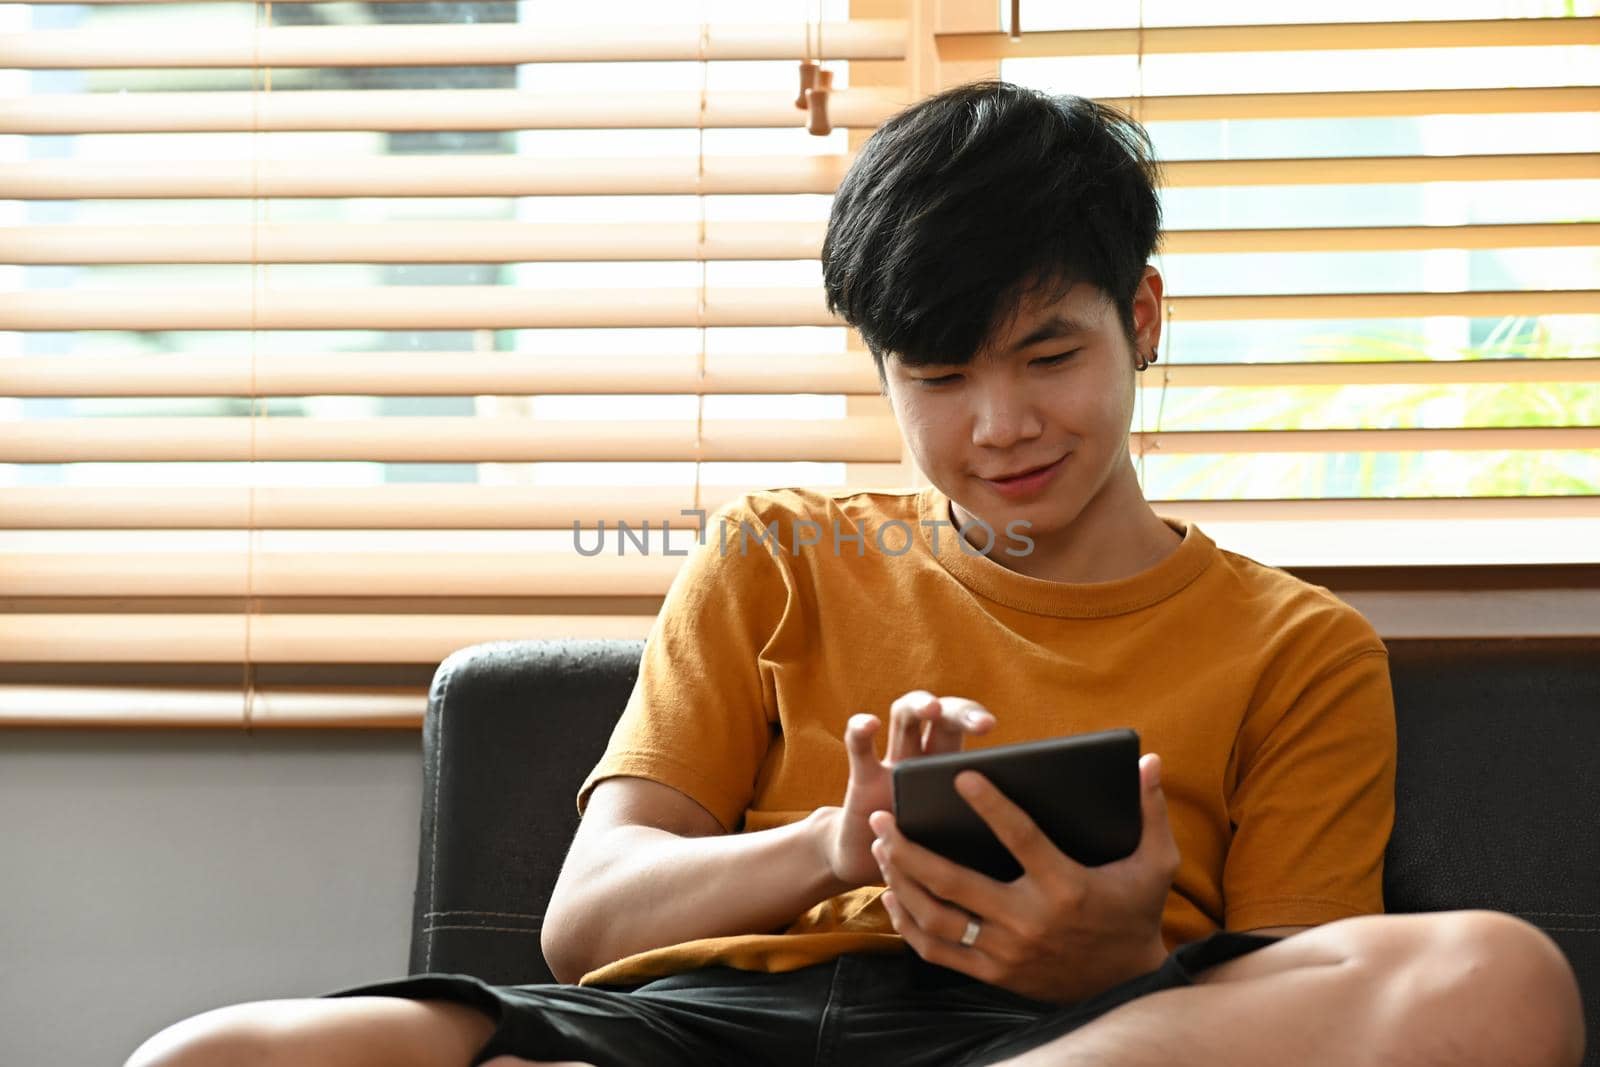 Smiling casual man sitting on couch and using digital tablet.